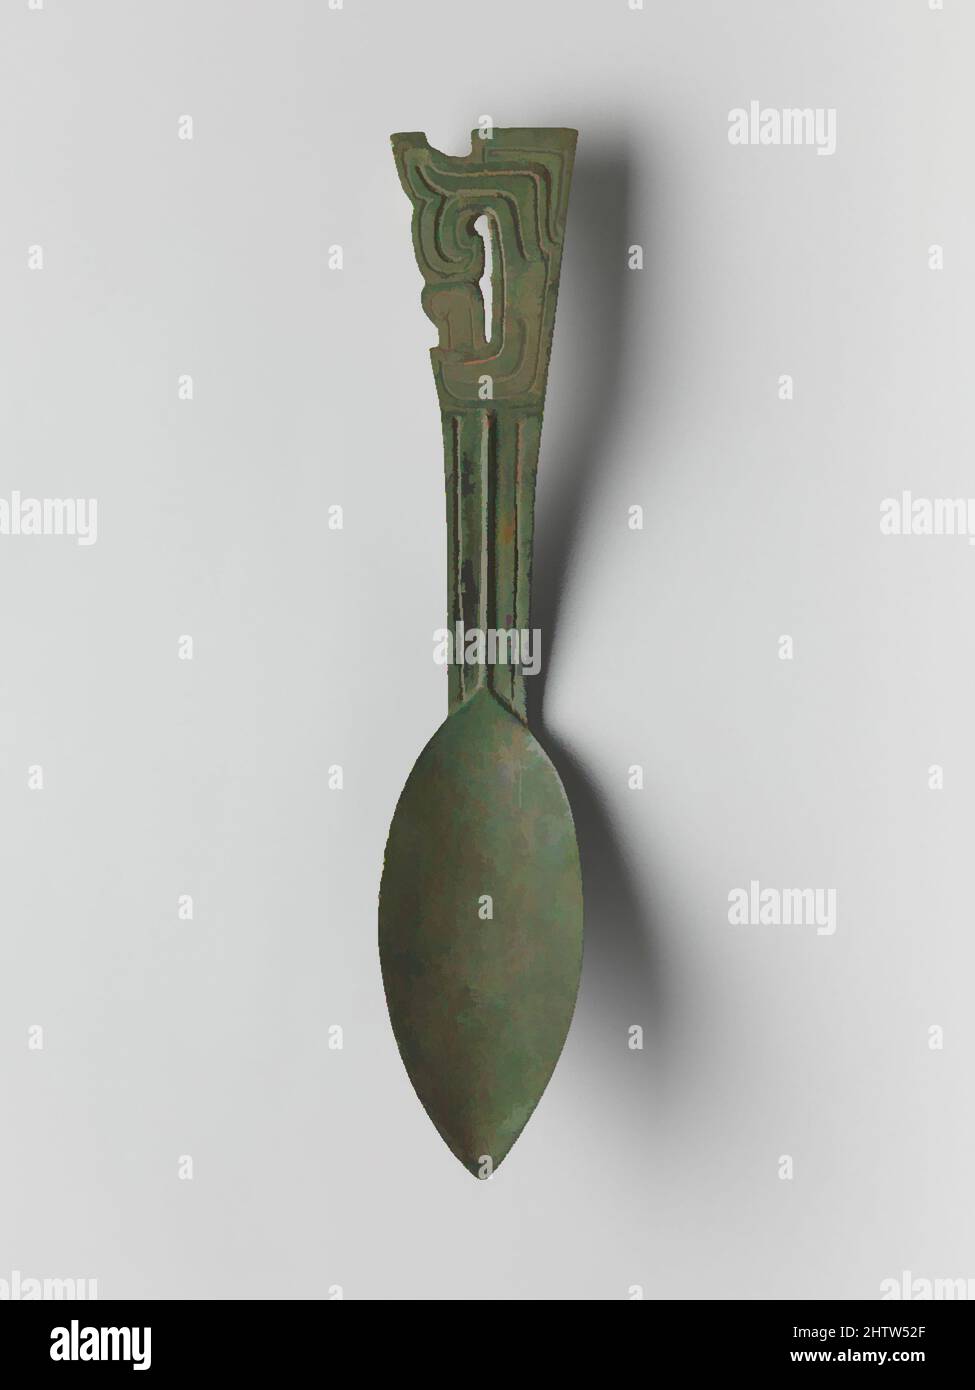 Art inspired by 匕, Ritual Spoon (Bi), mid-Zhou dynasty (1046–256 B.C.), China, Bronze, W. 2 1/2 in. (6.4 cm); L. 12 3/4 in. (32.4 cm); Wt. 1 lb. (0.5 kg), Metalwork, Classic works modernized by Artotop with a splash of modernity. Shapes, color and value, eye-catching visual impact on art. Emotions through freedom of artworks in a contemporary way. A timeless message pursuing a wildly creative new direction. Artists turning to the digital medium and creating the Artotop NFT Stock Photo